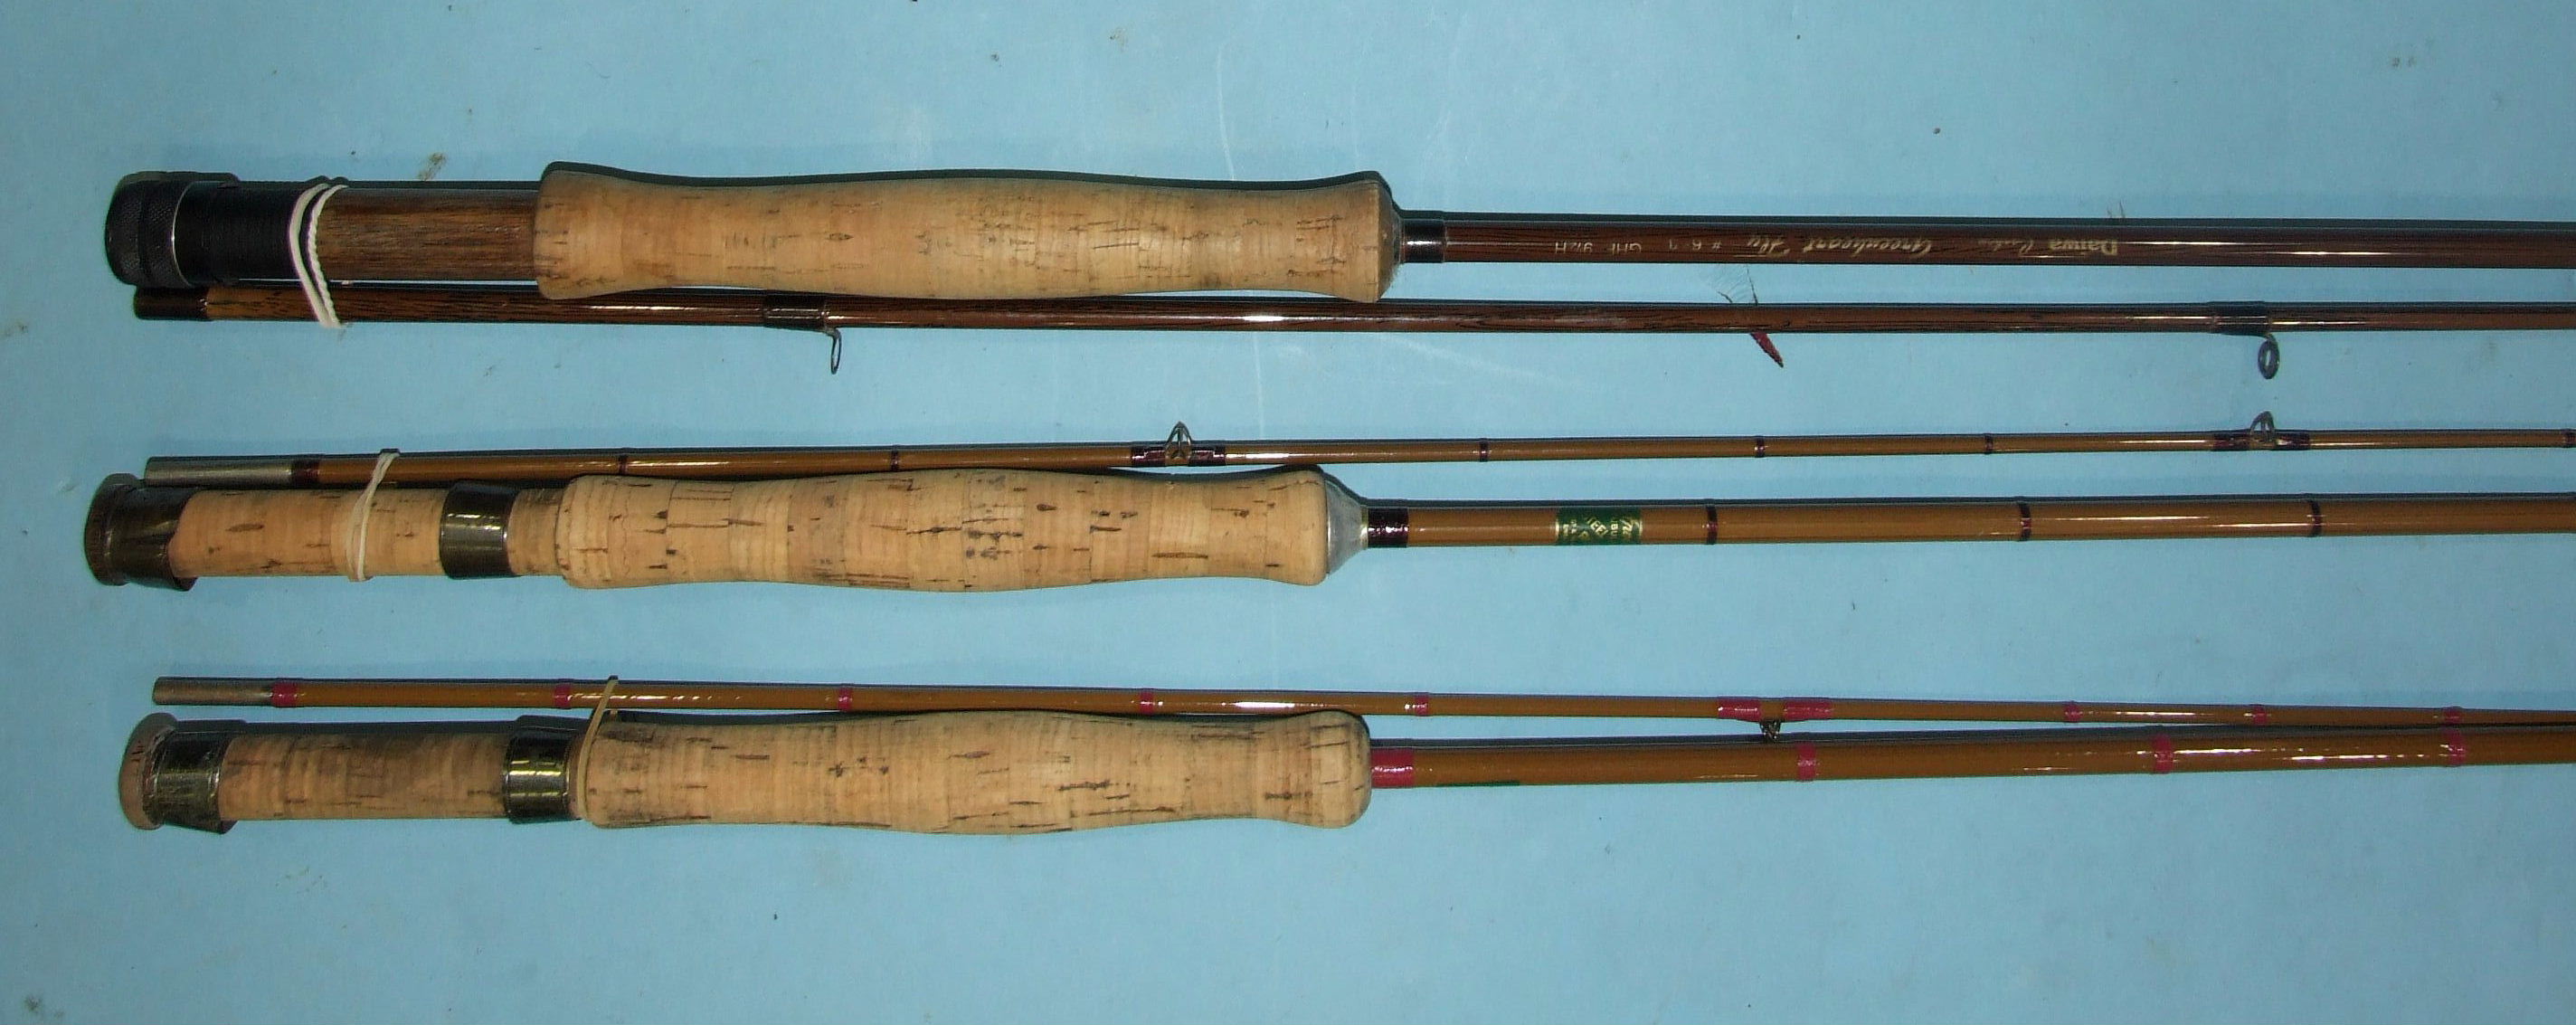 A White River Classic No.6 graphite rod, four other graphite rods, two tubular steel trout rods - Image 3 of 3